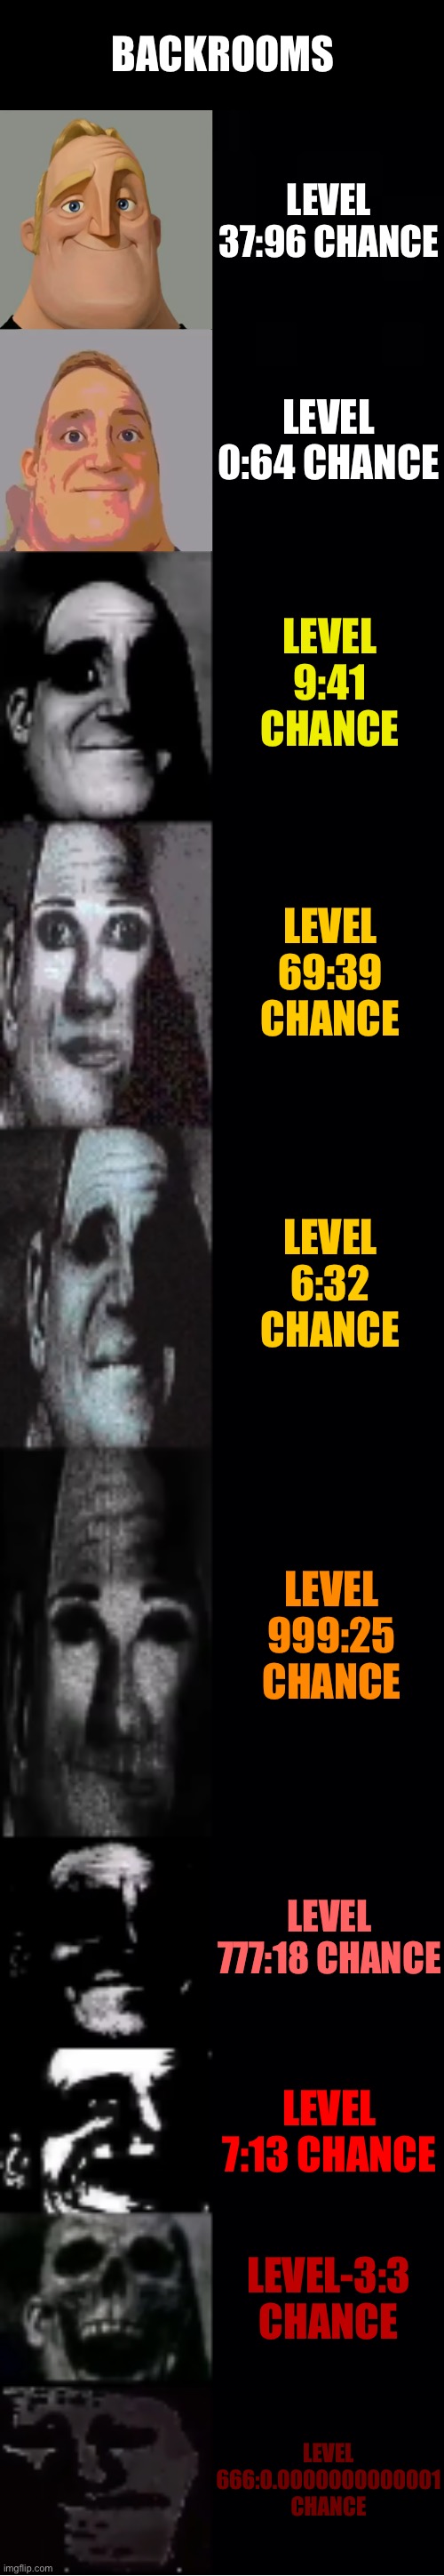 Level 777 - The Backrooms